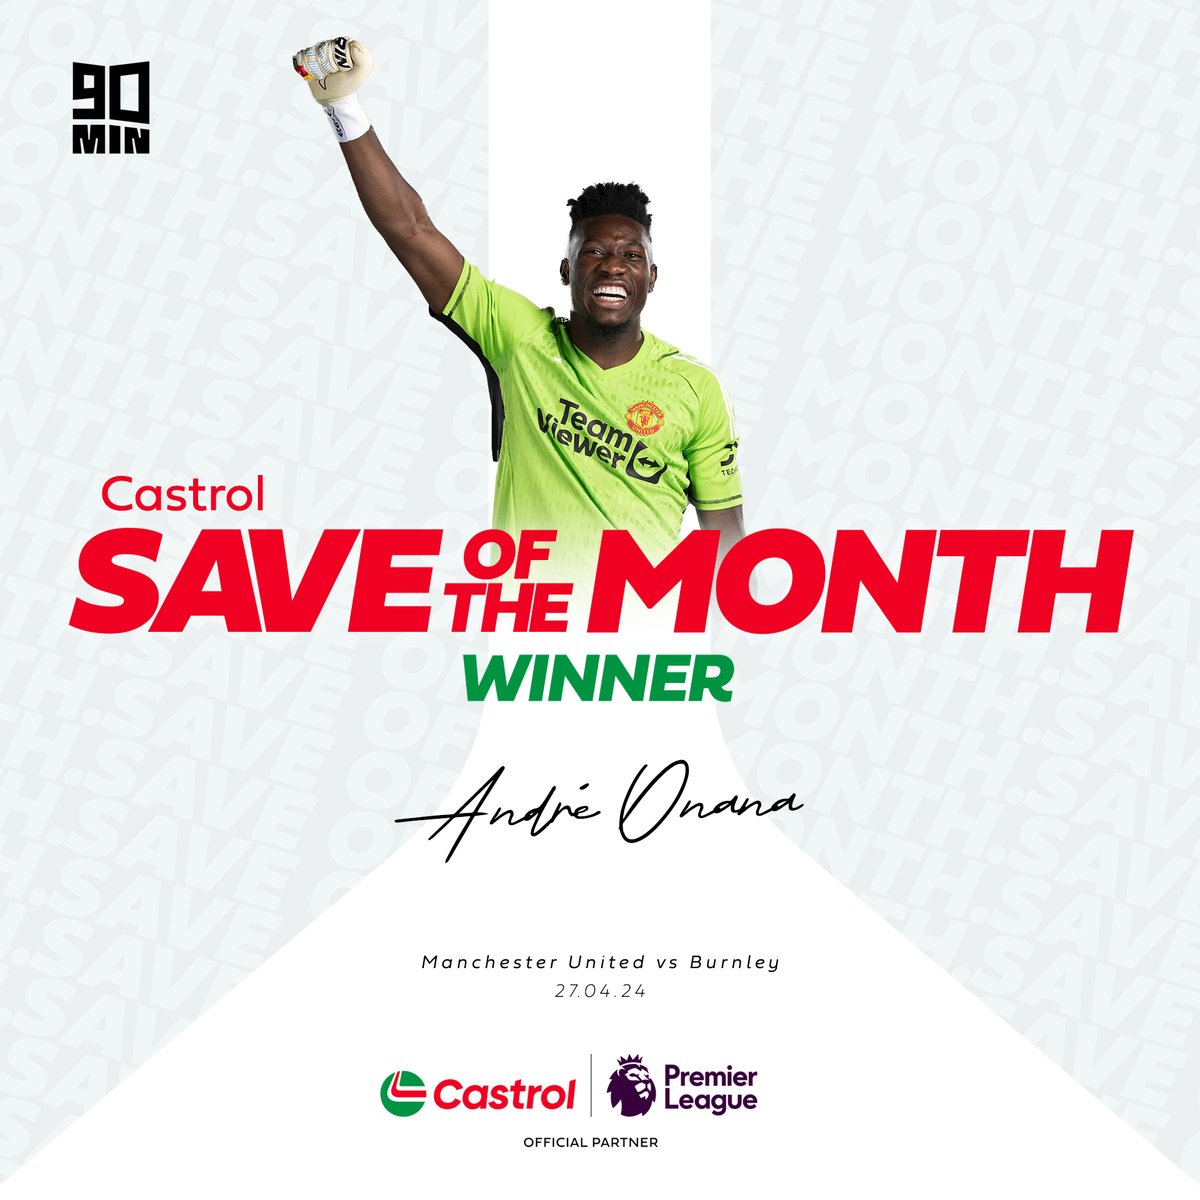 Quick reactions and a strong hand to deny Burnley! 💪 Andre Onana wins the @premierleague Castrol Save of the Month for April...